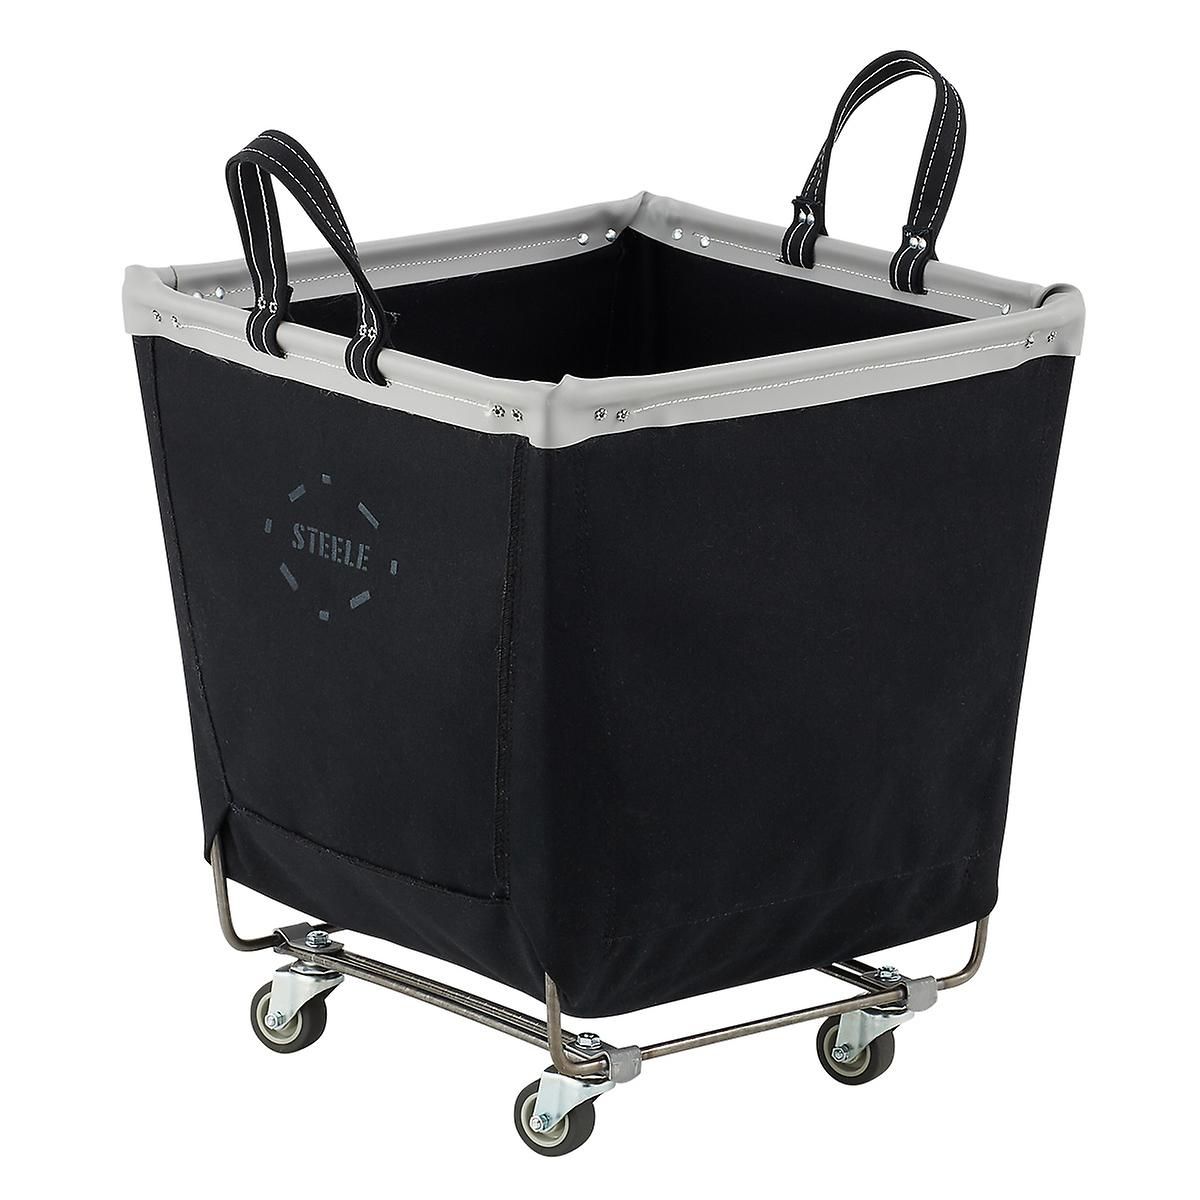 Large Steele Canvas Laundry Cart Black/Grey | The Container Store